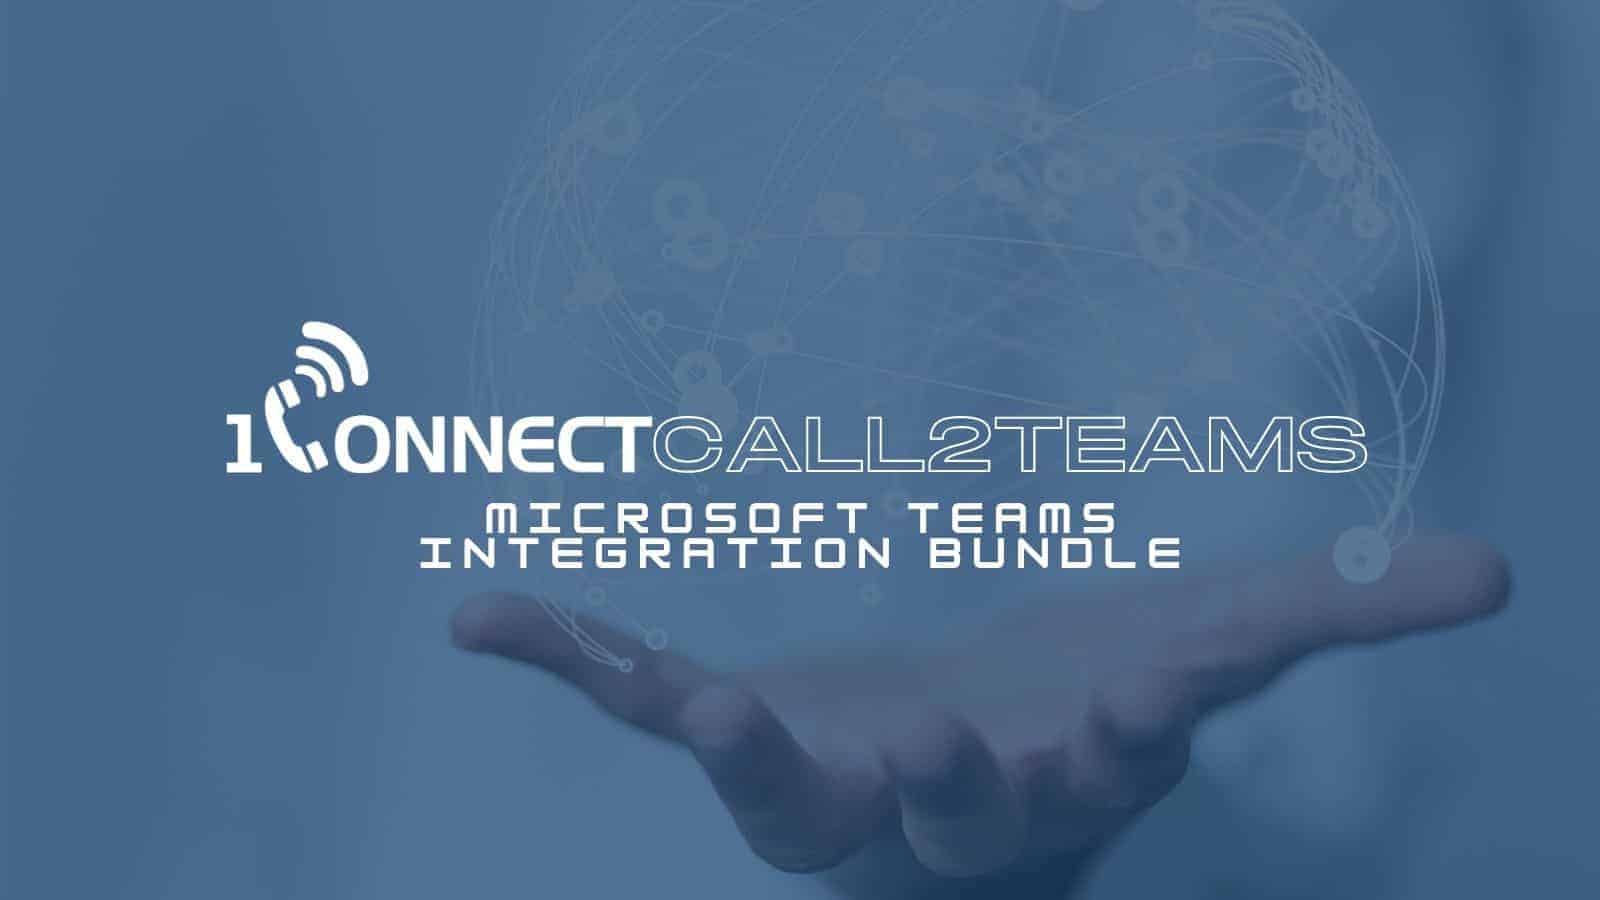 Transforming your business 1 1Connect Ltd - Bringing IT and Communications Together